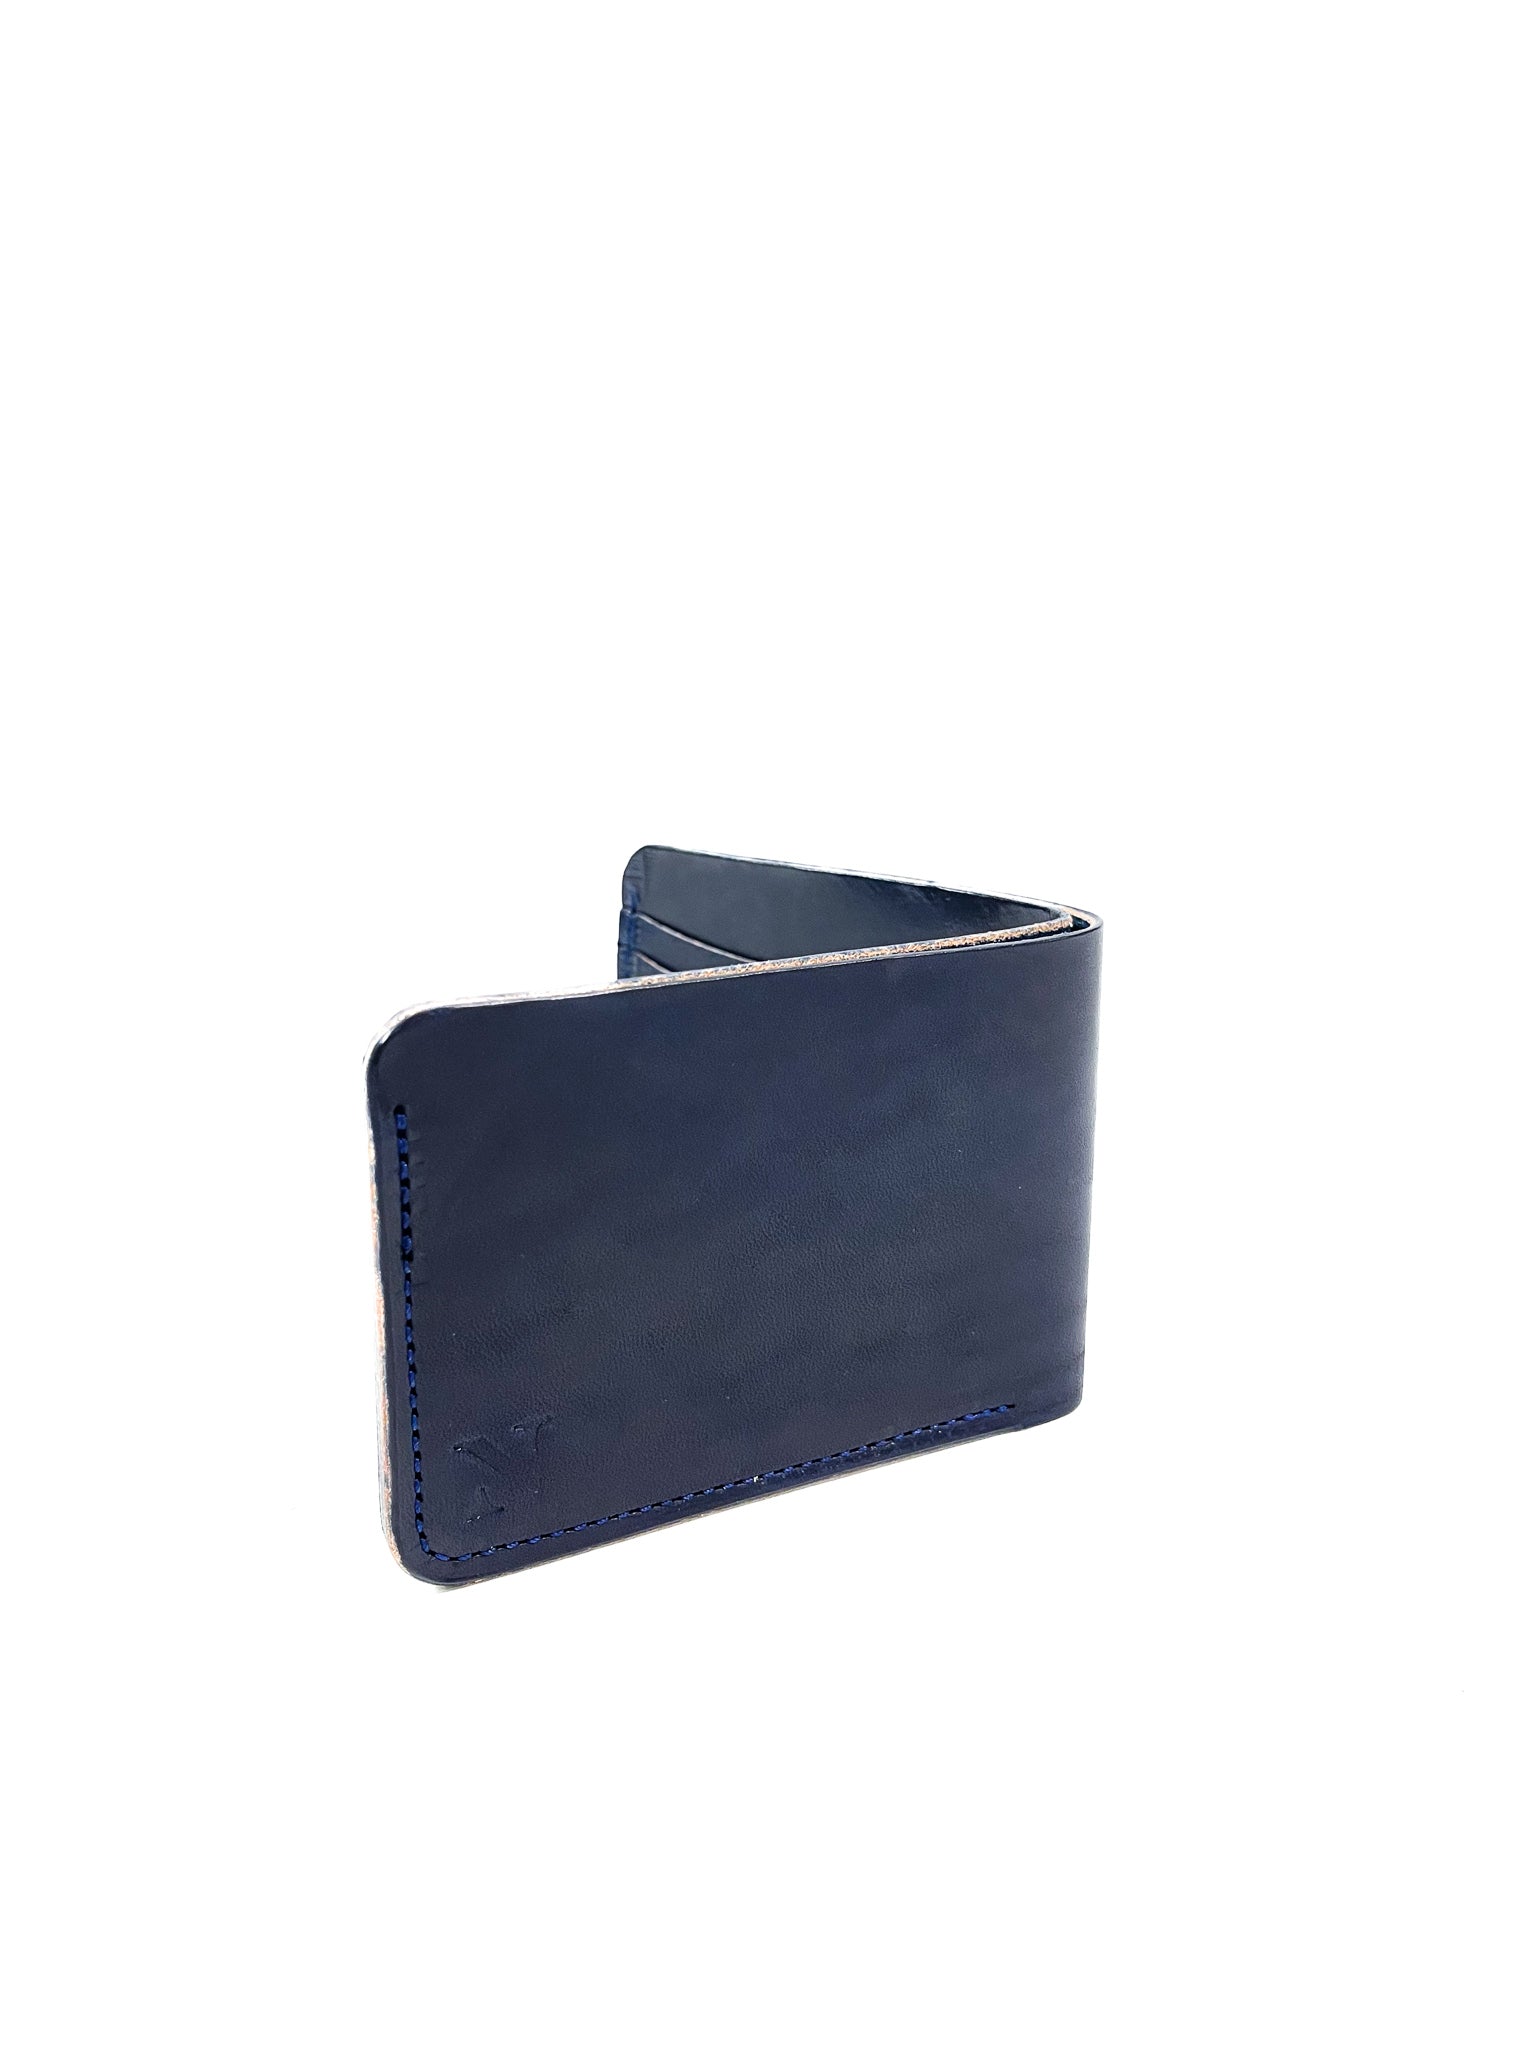 HUMAN MADE Leather Wallet Navy-